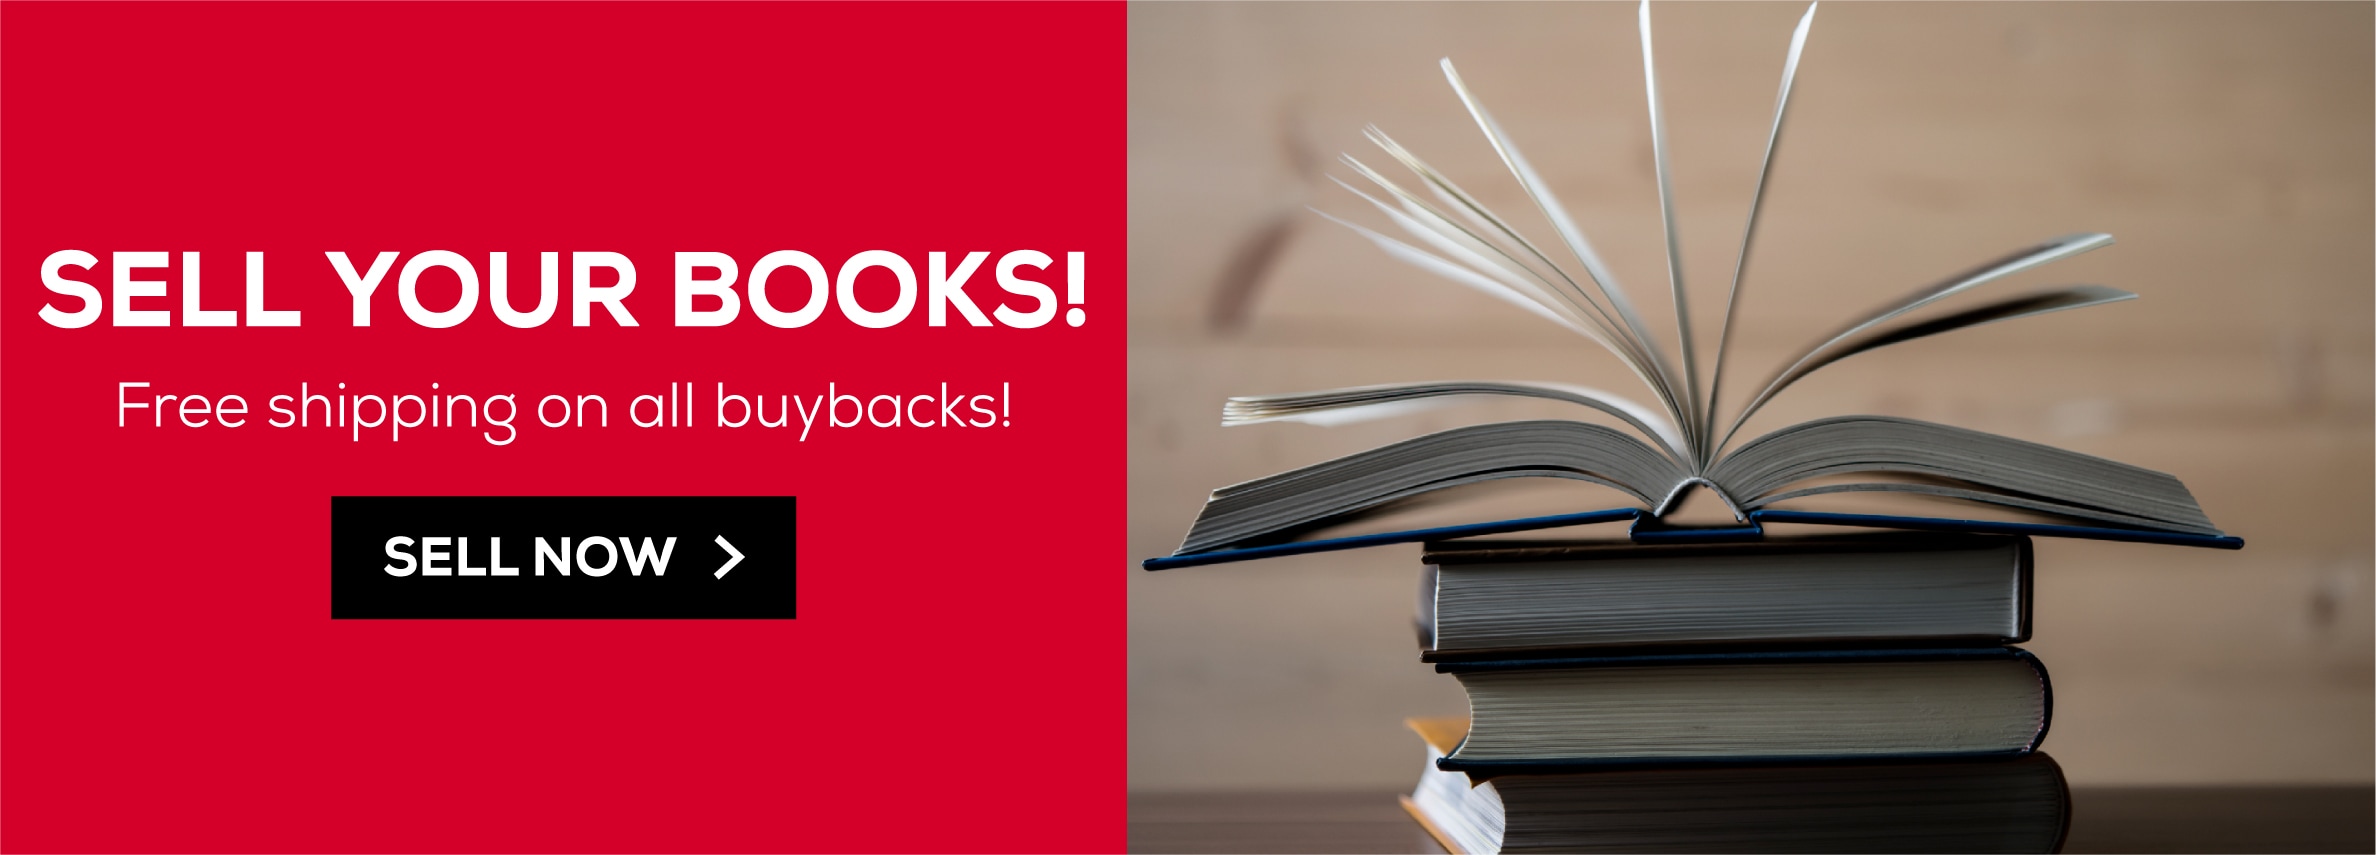 Sell Your Books! Free shipping on all buybacks! Sell Now